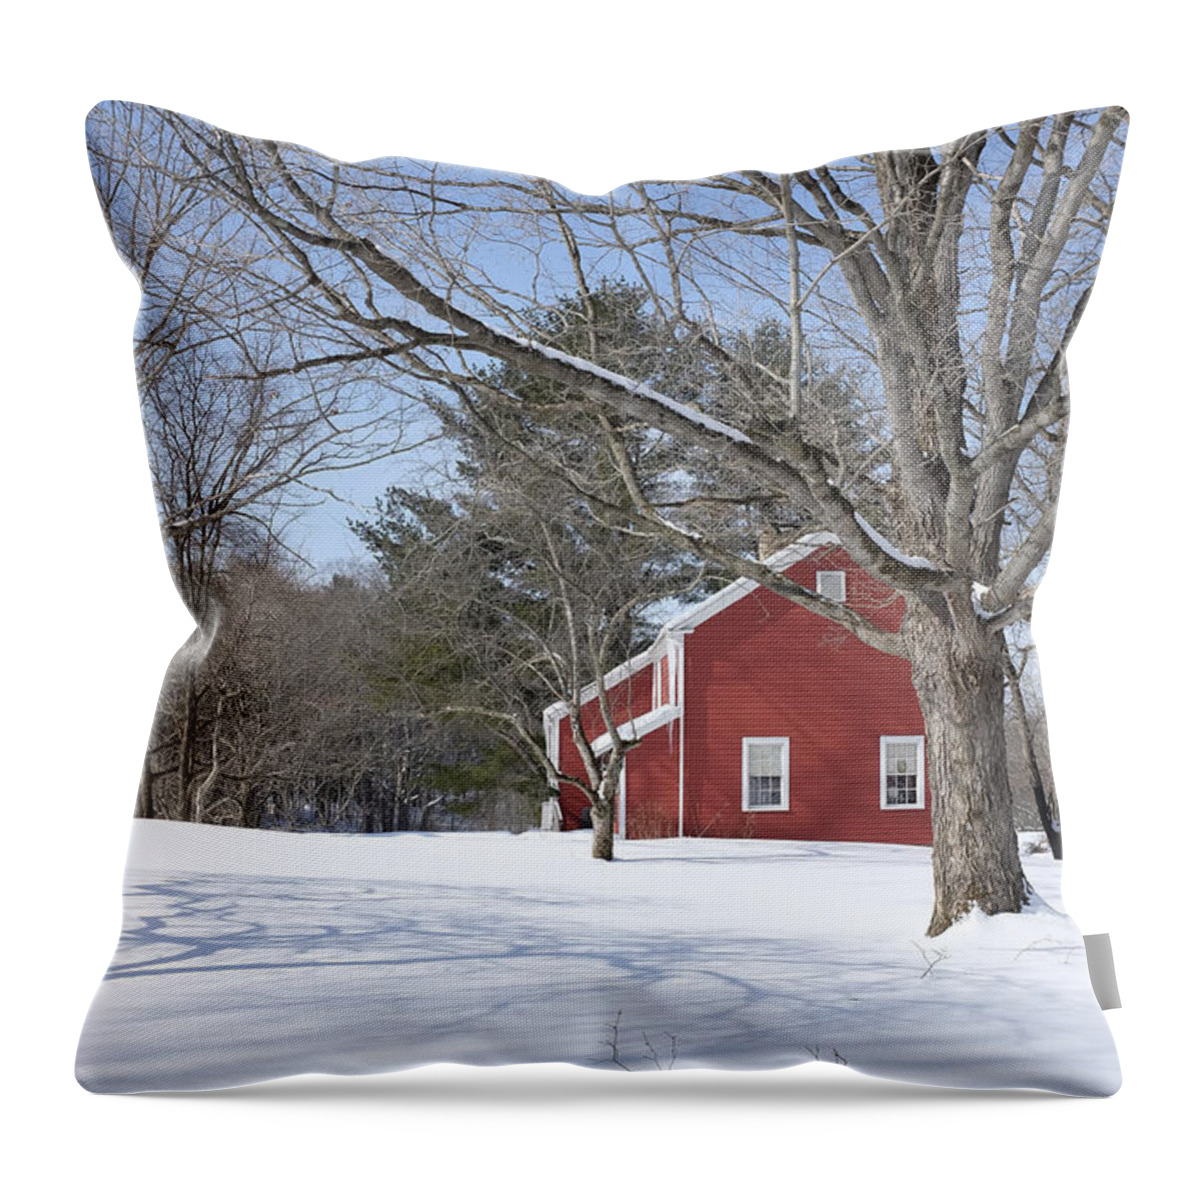 Winter Throw Pillow featuring the photograph New England Red House Winter by Edward Fielding